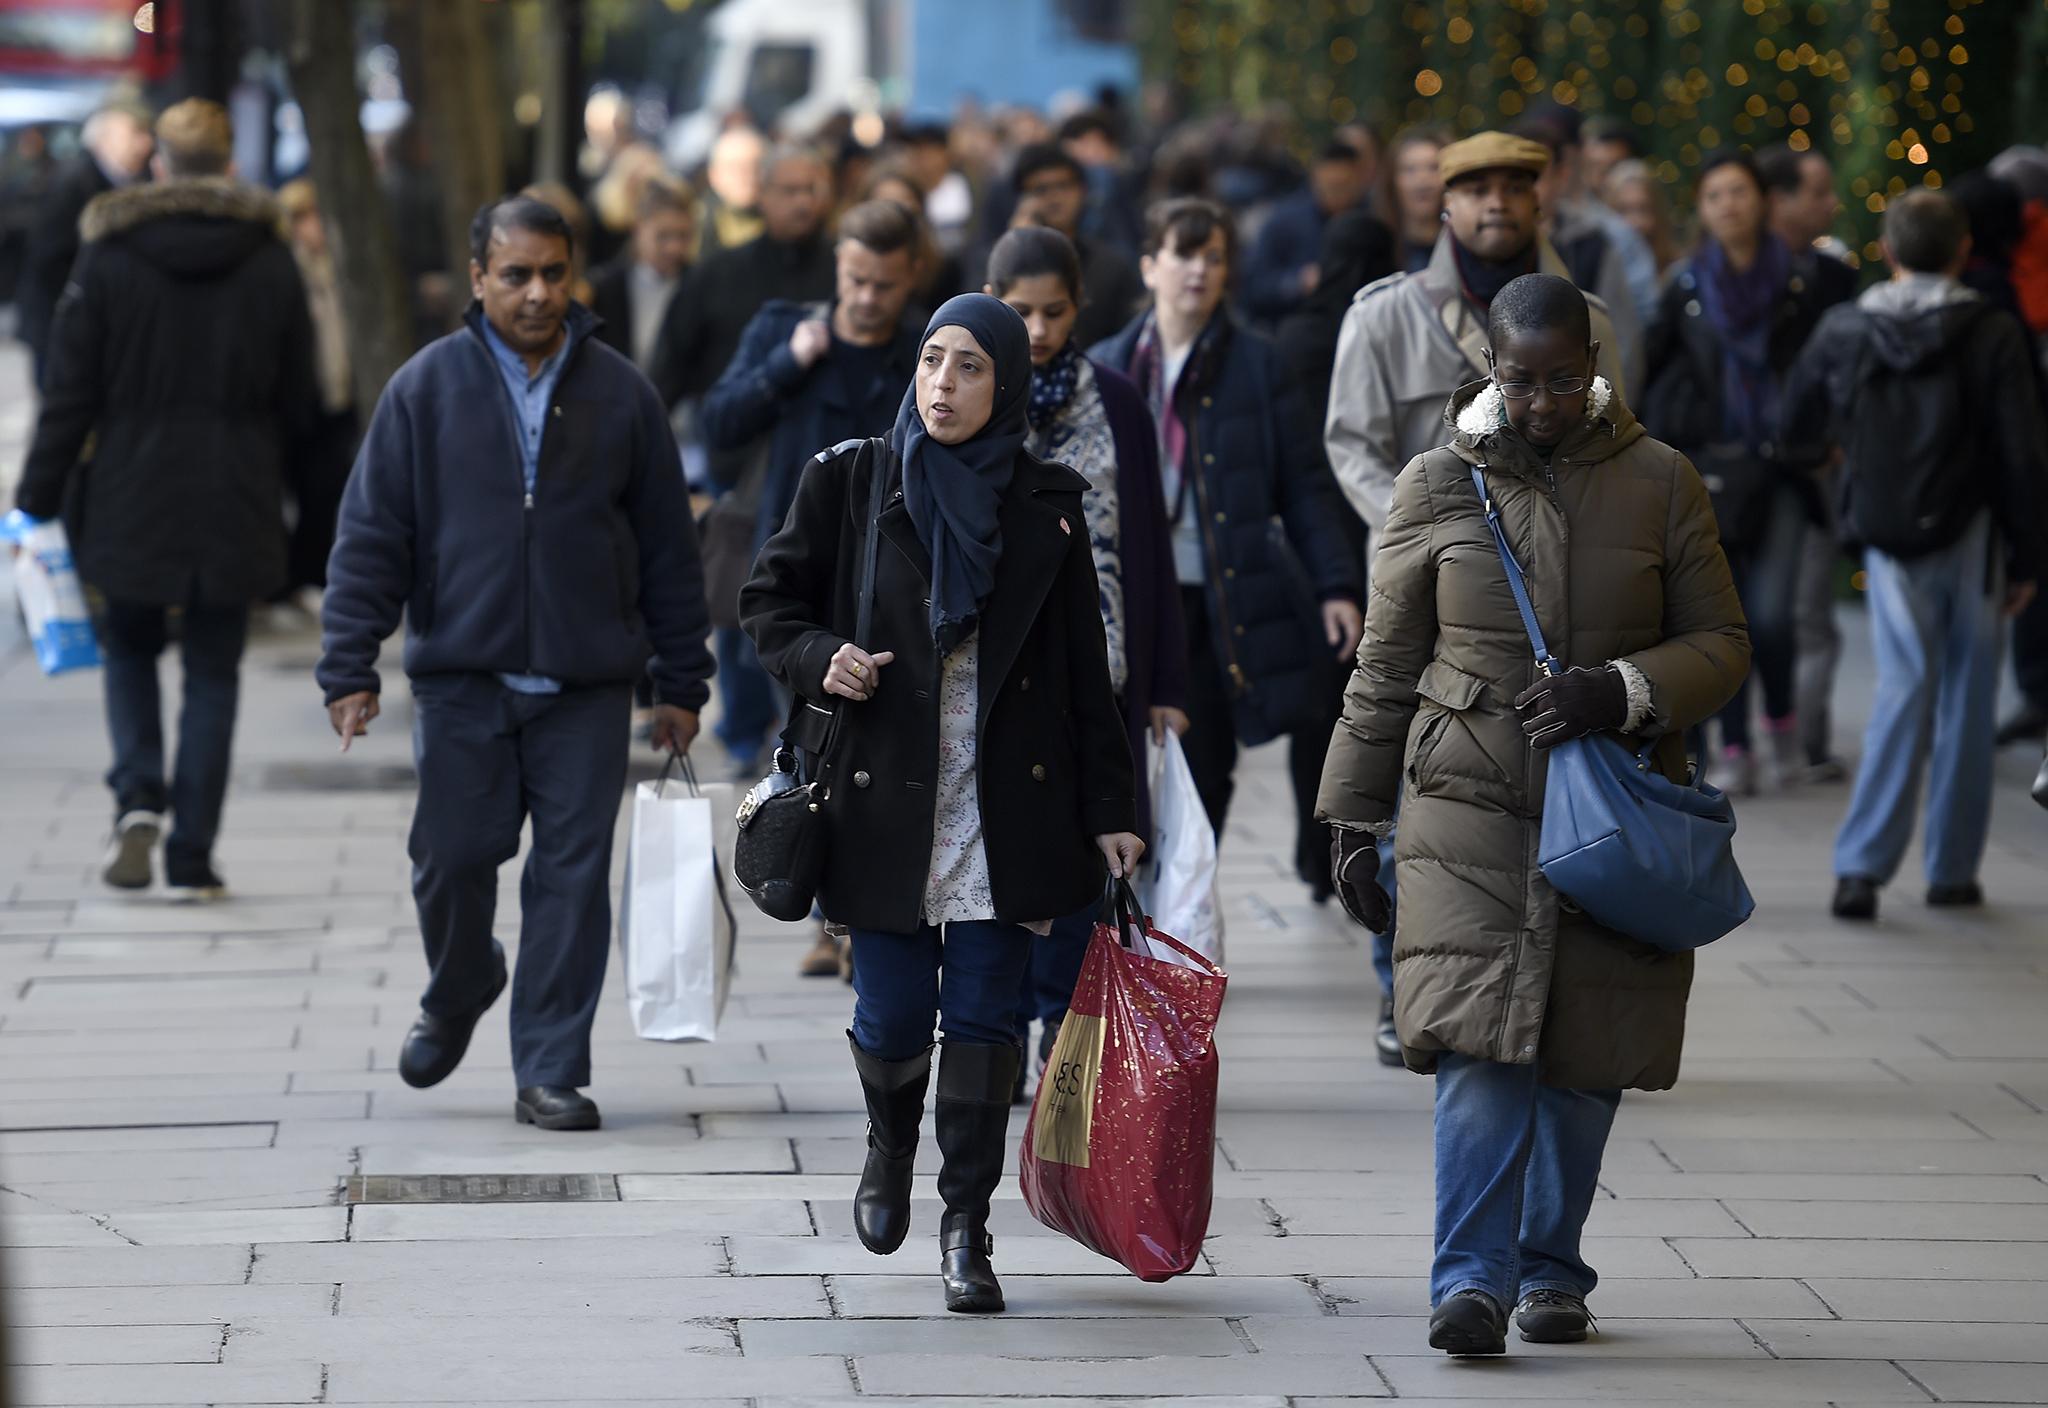 The employment gap between British Asians and White Brits has shrunk dramatically over the past decade